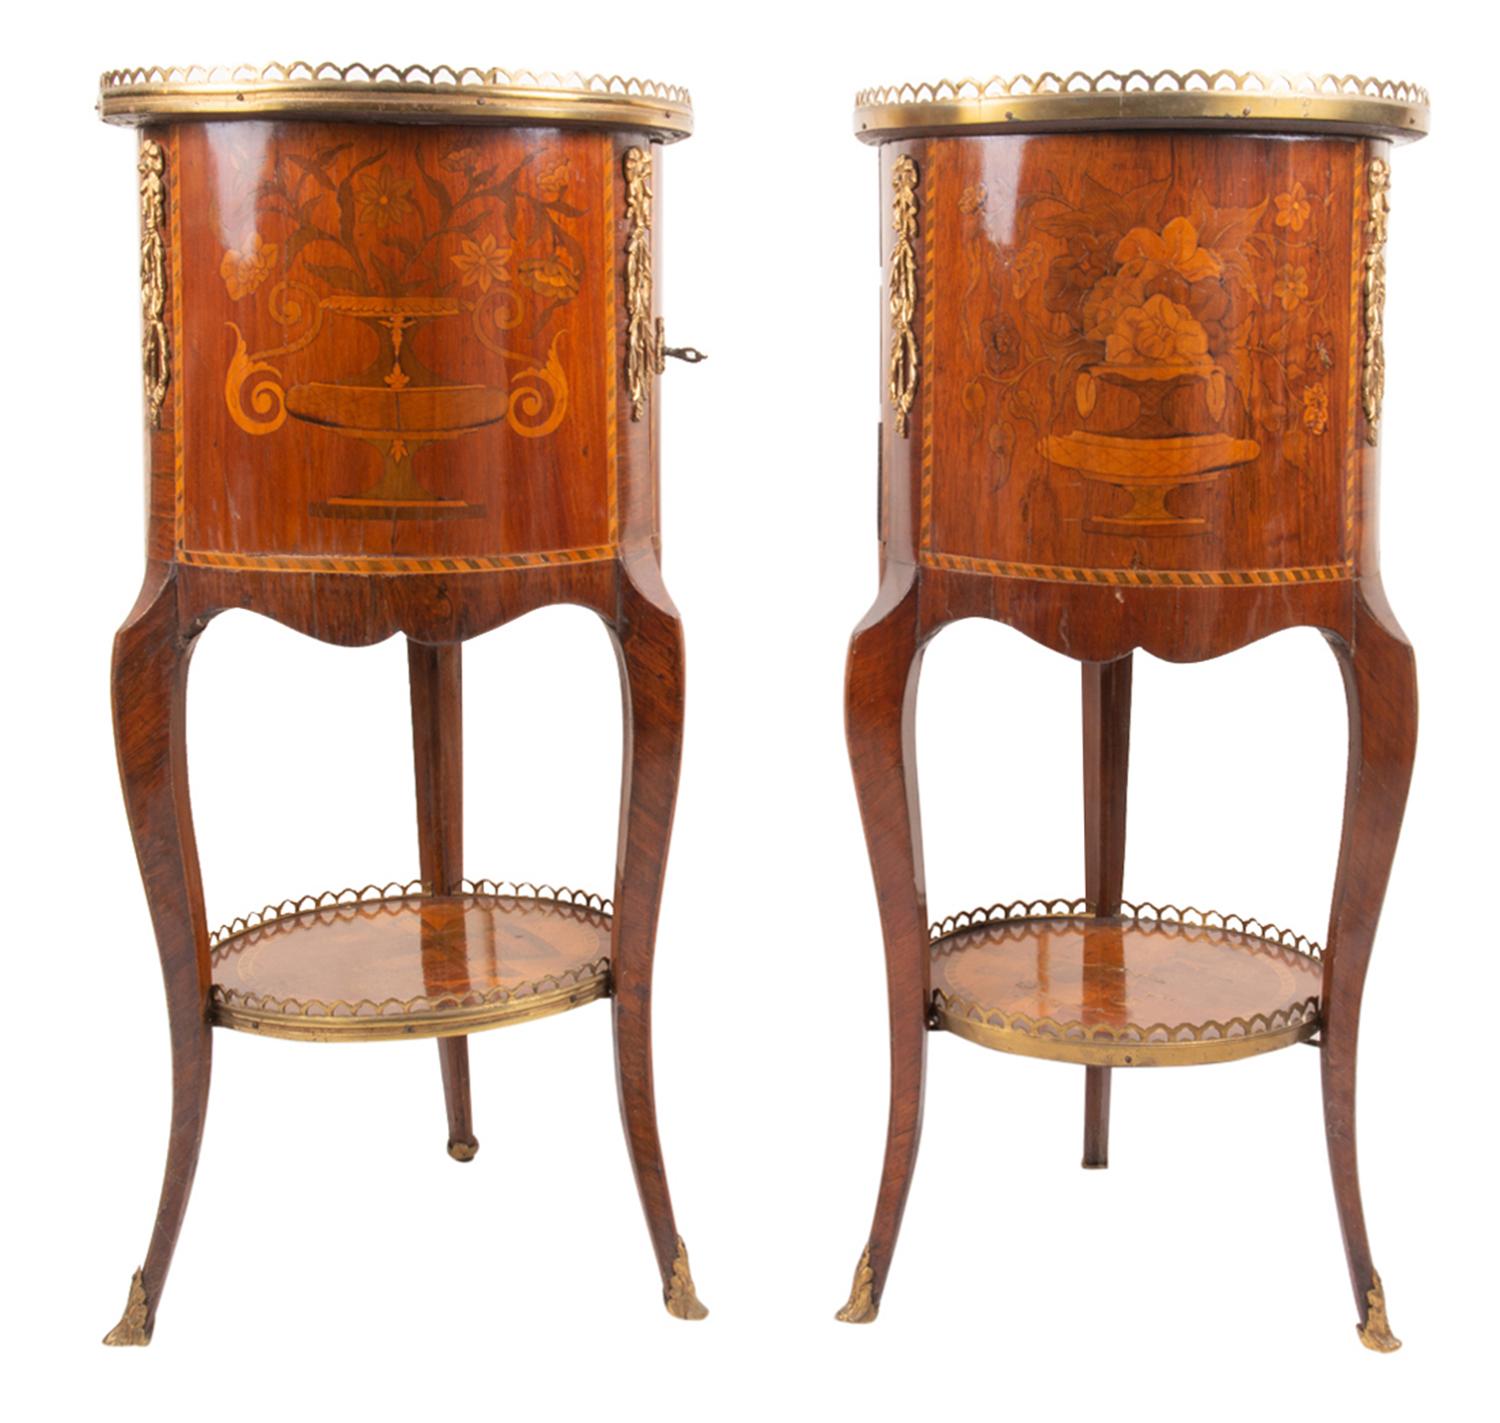 A good quality pair of late 19th century French circular inlaid side cabinets, each with classical oriental influenced inlaid decoration, an ormolu gallery, one with three drawers the other with a cupboard and drawer within., raised on three